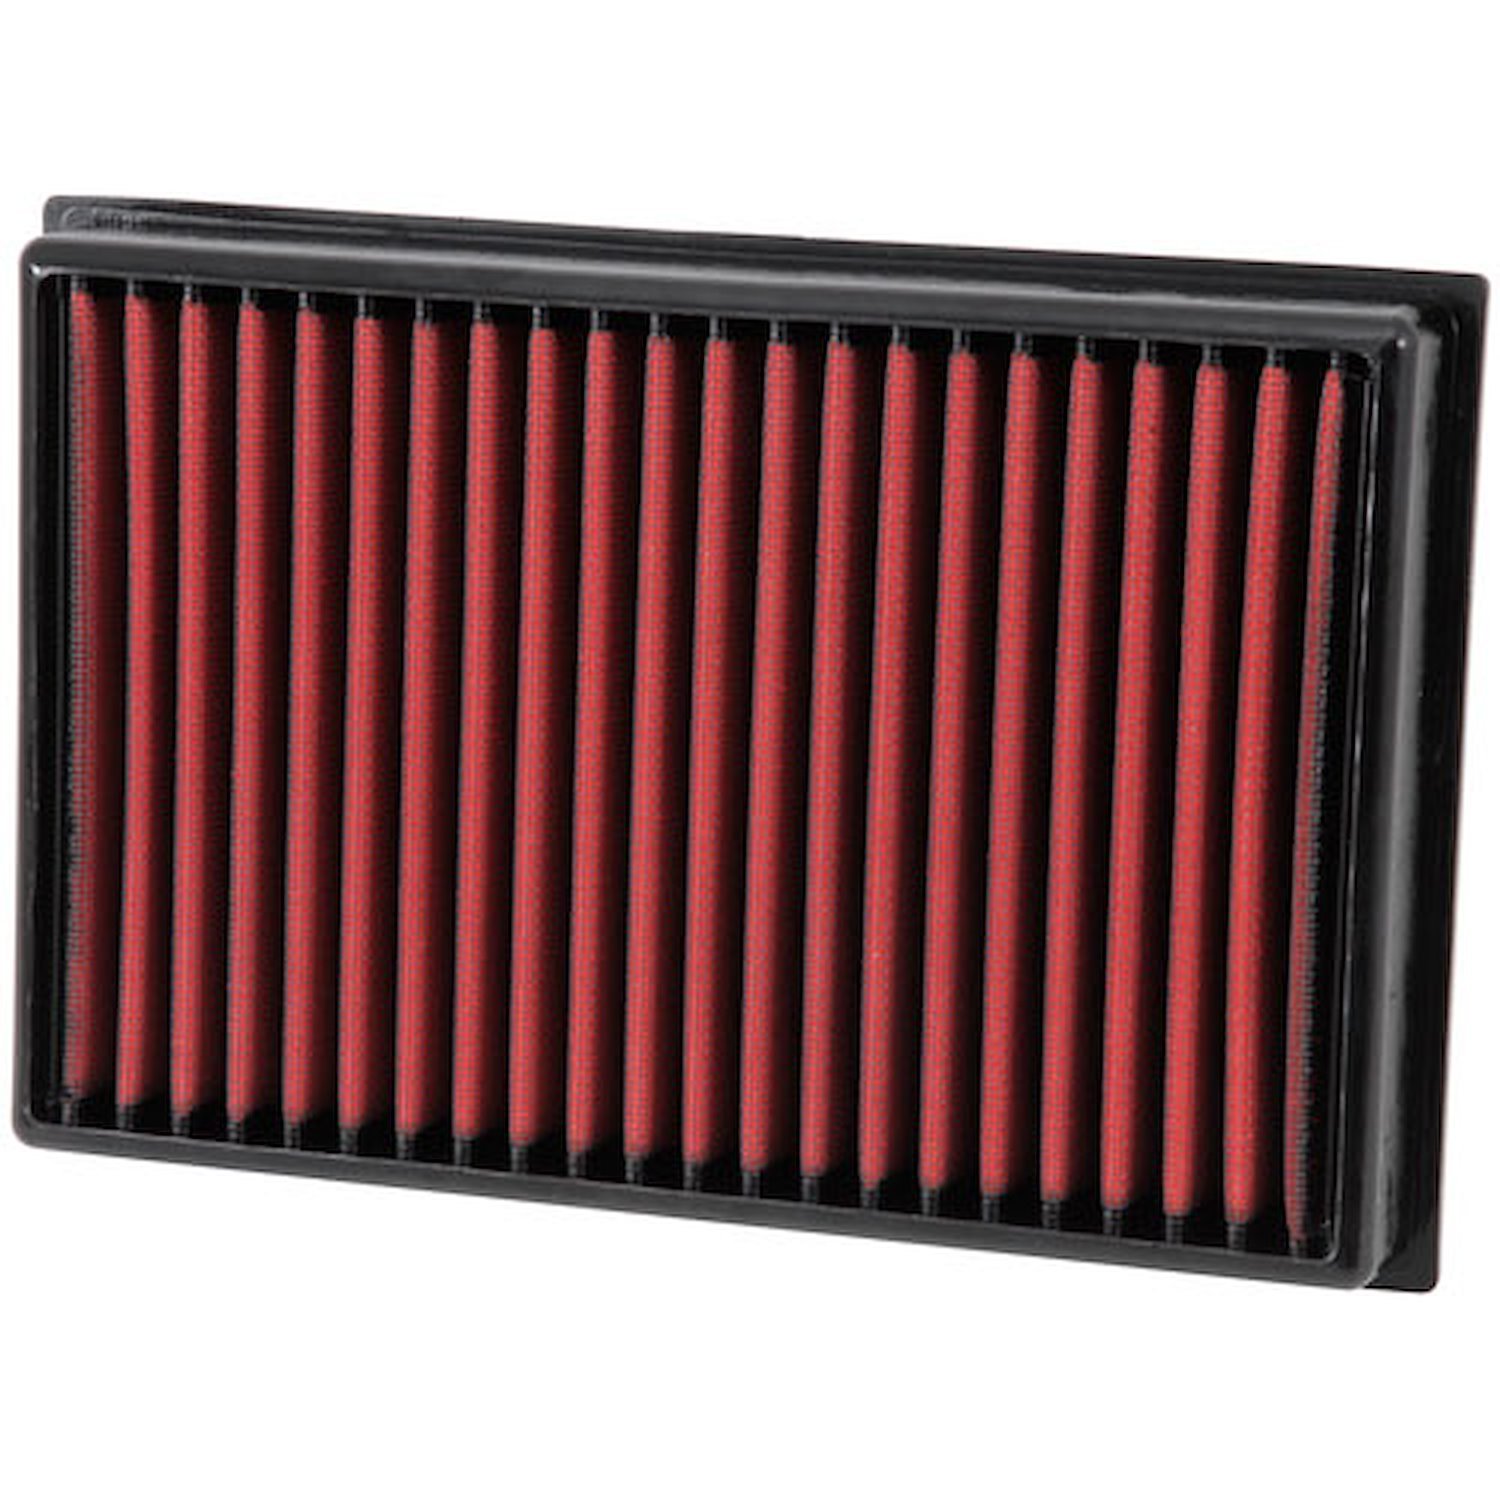 DryFlow Replacement Air Filter 1992-2011 Ford Crown Victoria, Lincoln Town Car, Mercury Grand Marquis 4.6L